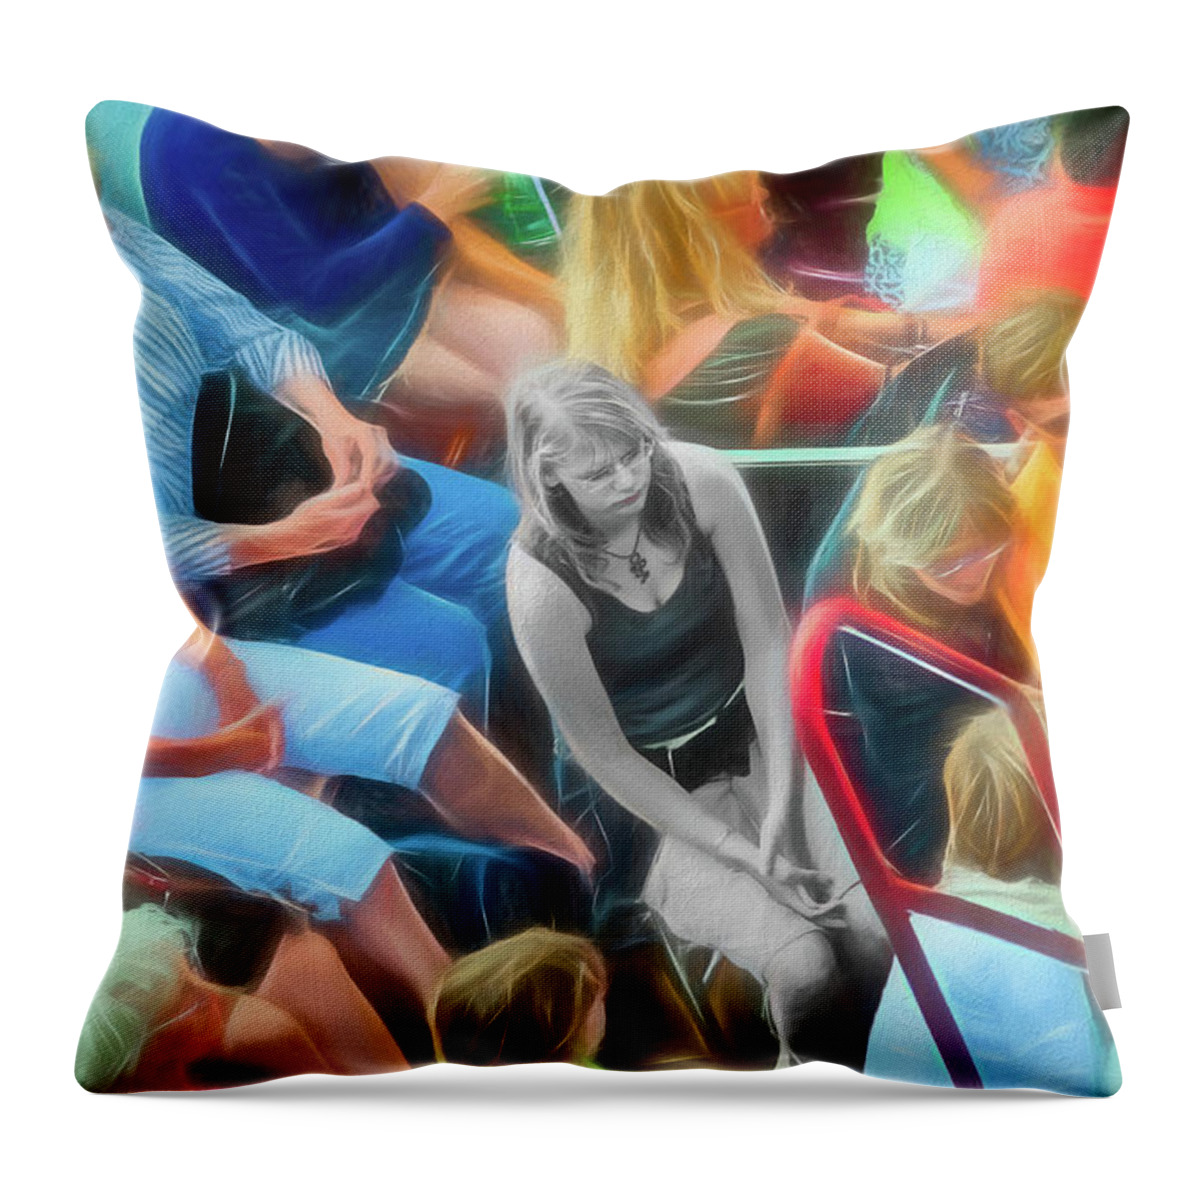 Isolation Throw Pillow featuring the photograph Alone Together by Harry Spitz